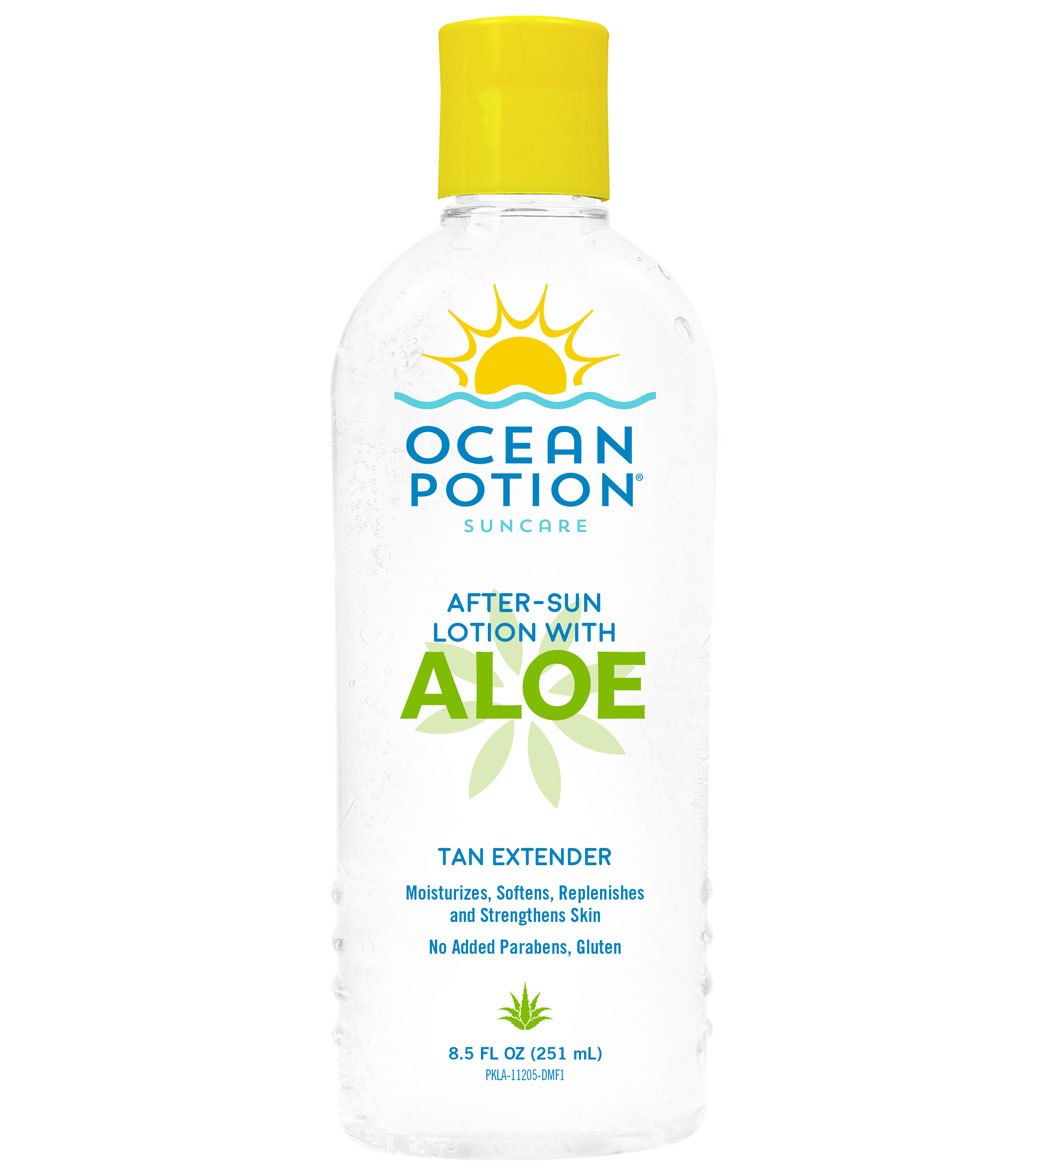 Ocean Potion AfterSun Lotion with Aloe (8.5 oz) at